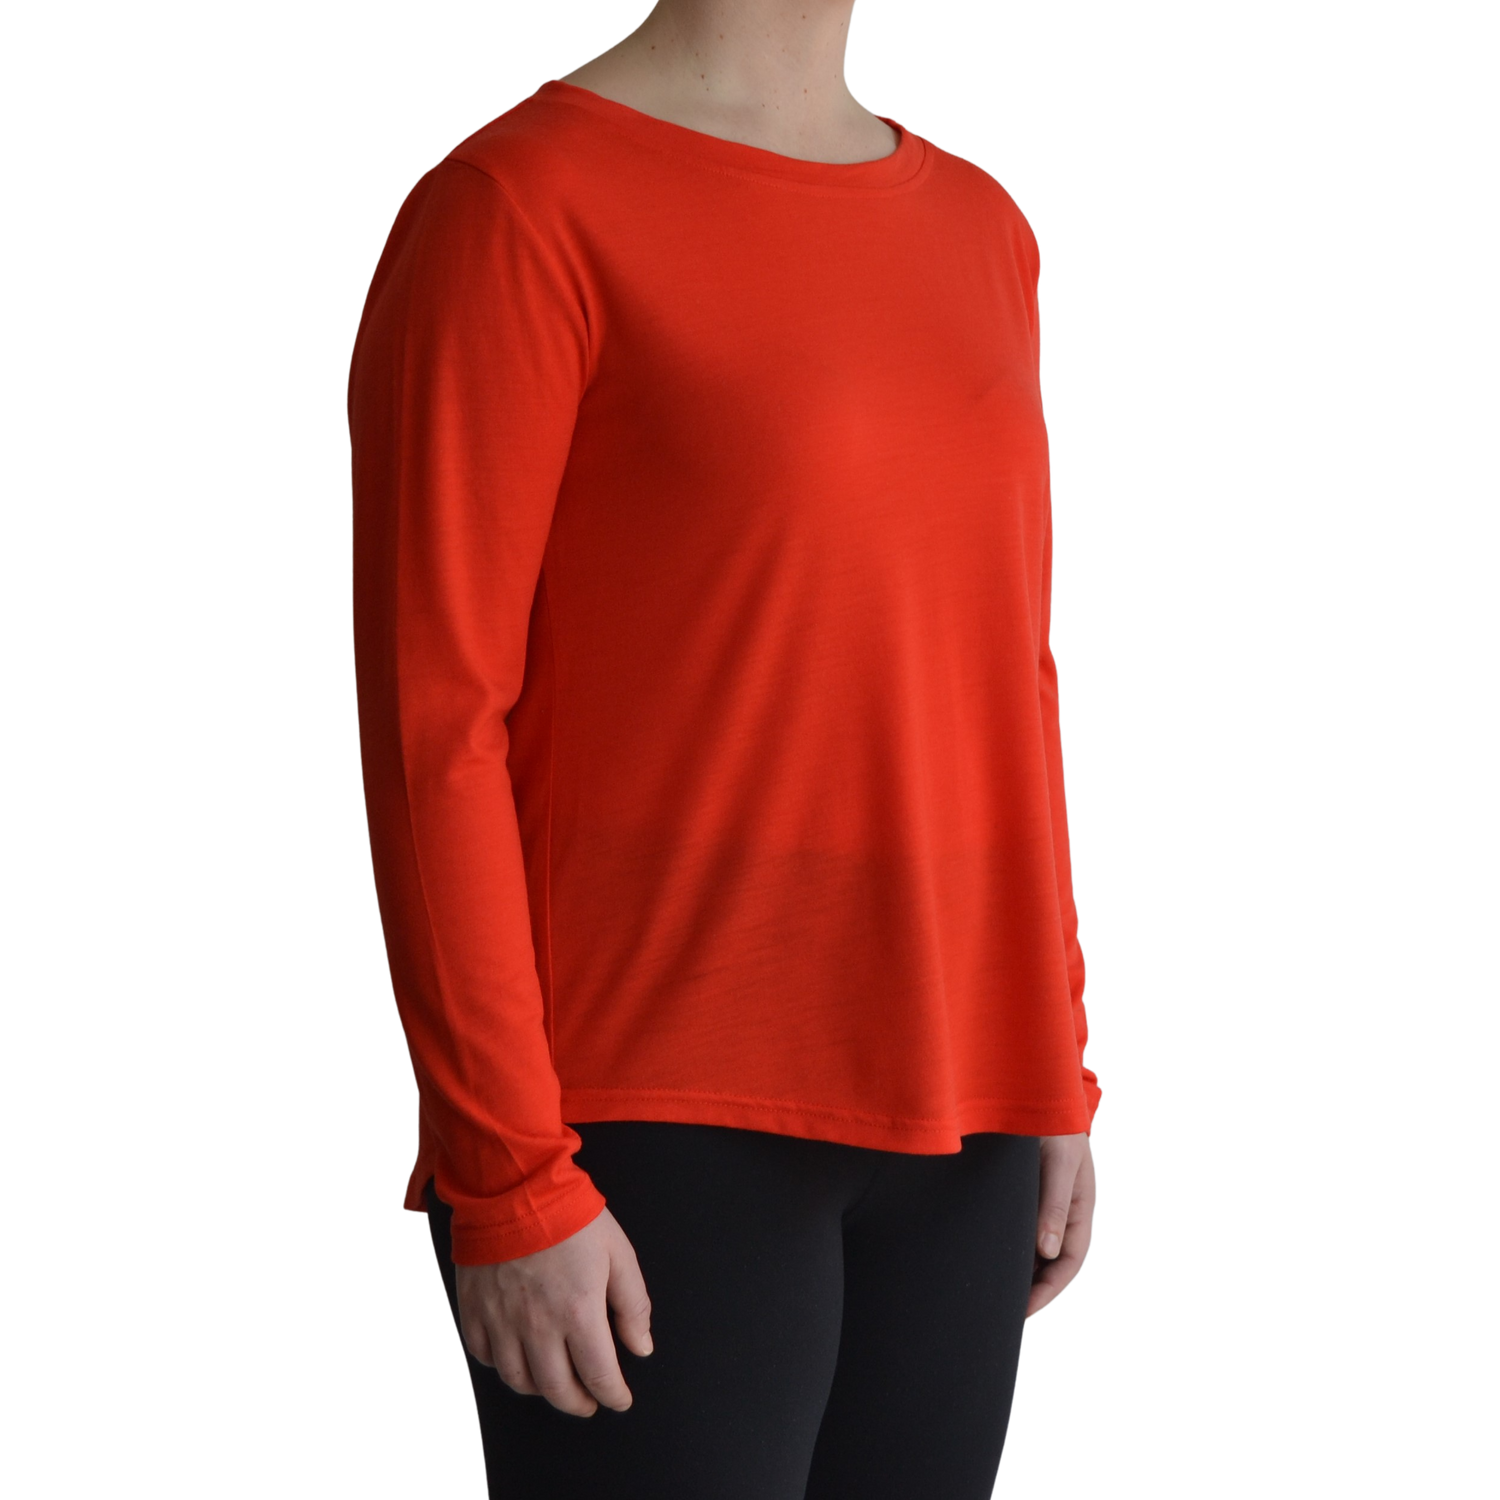 Links long sleeve merino top in mandarin colour. The model is standing on 45 degree angle facing forward